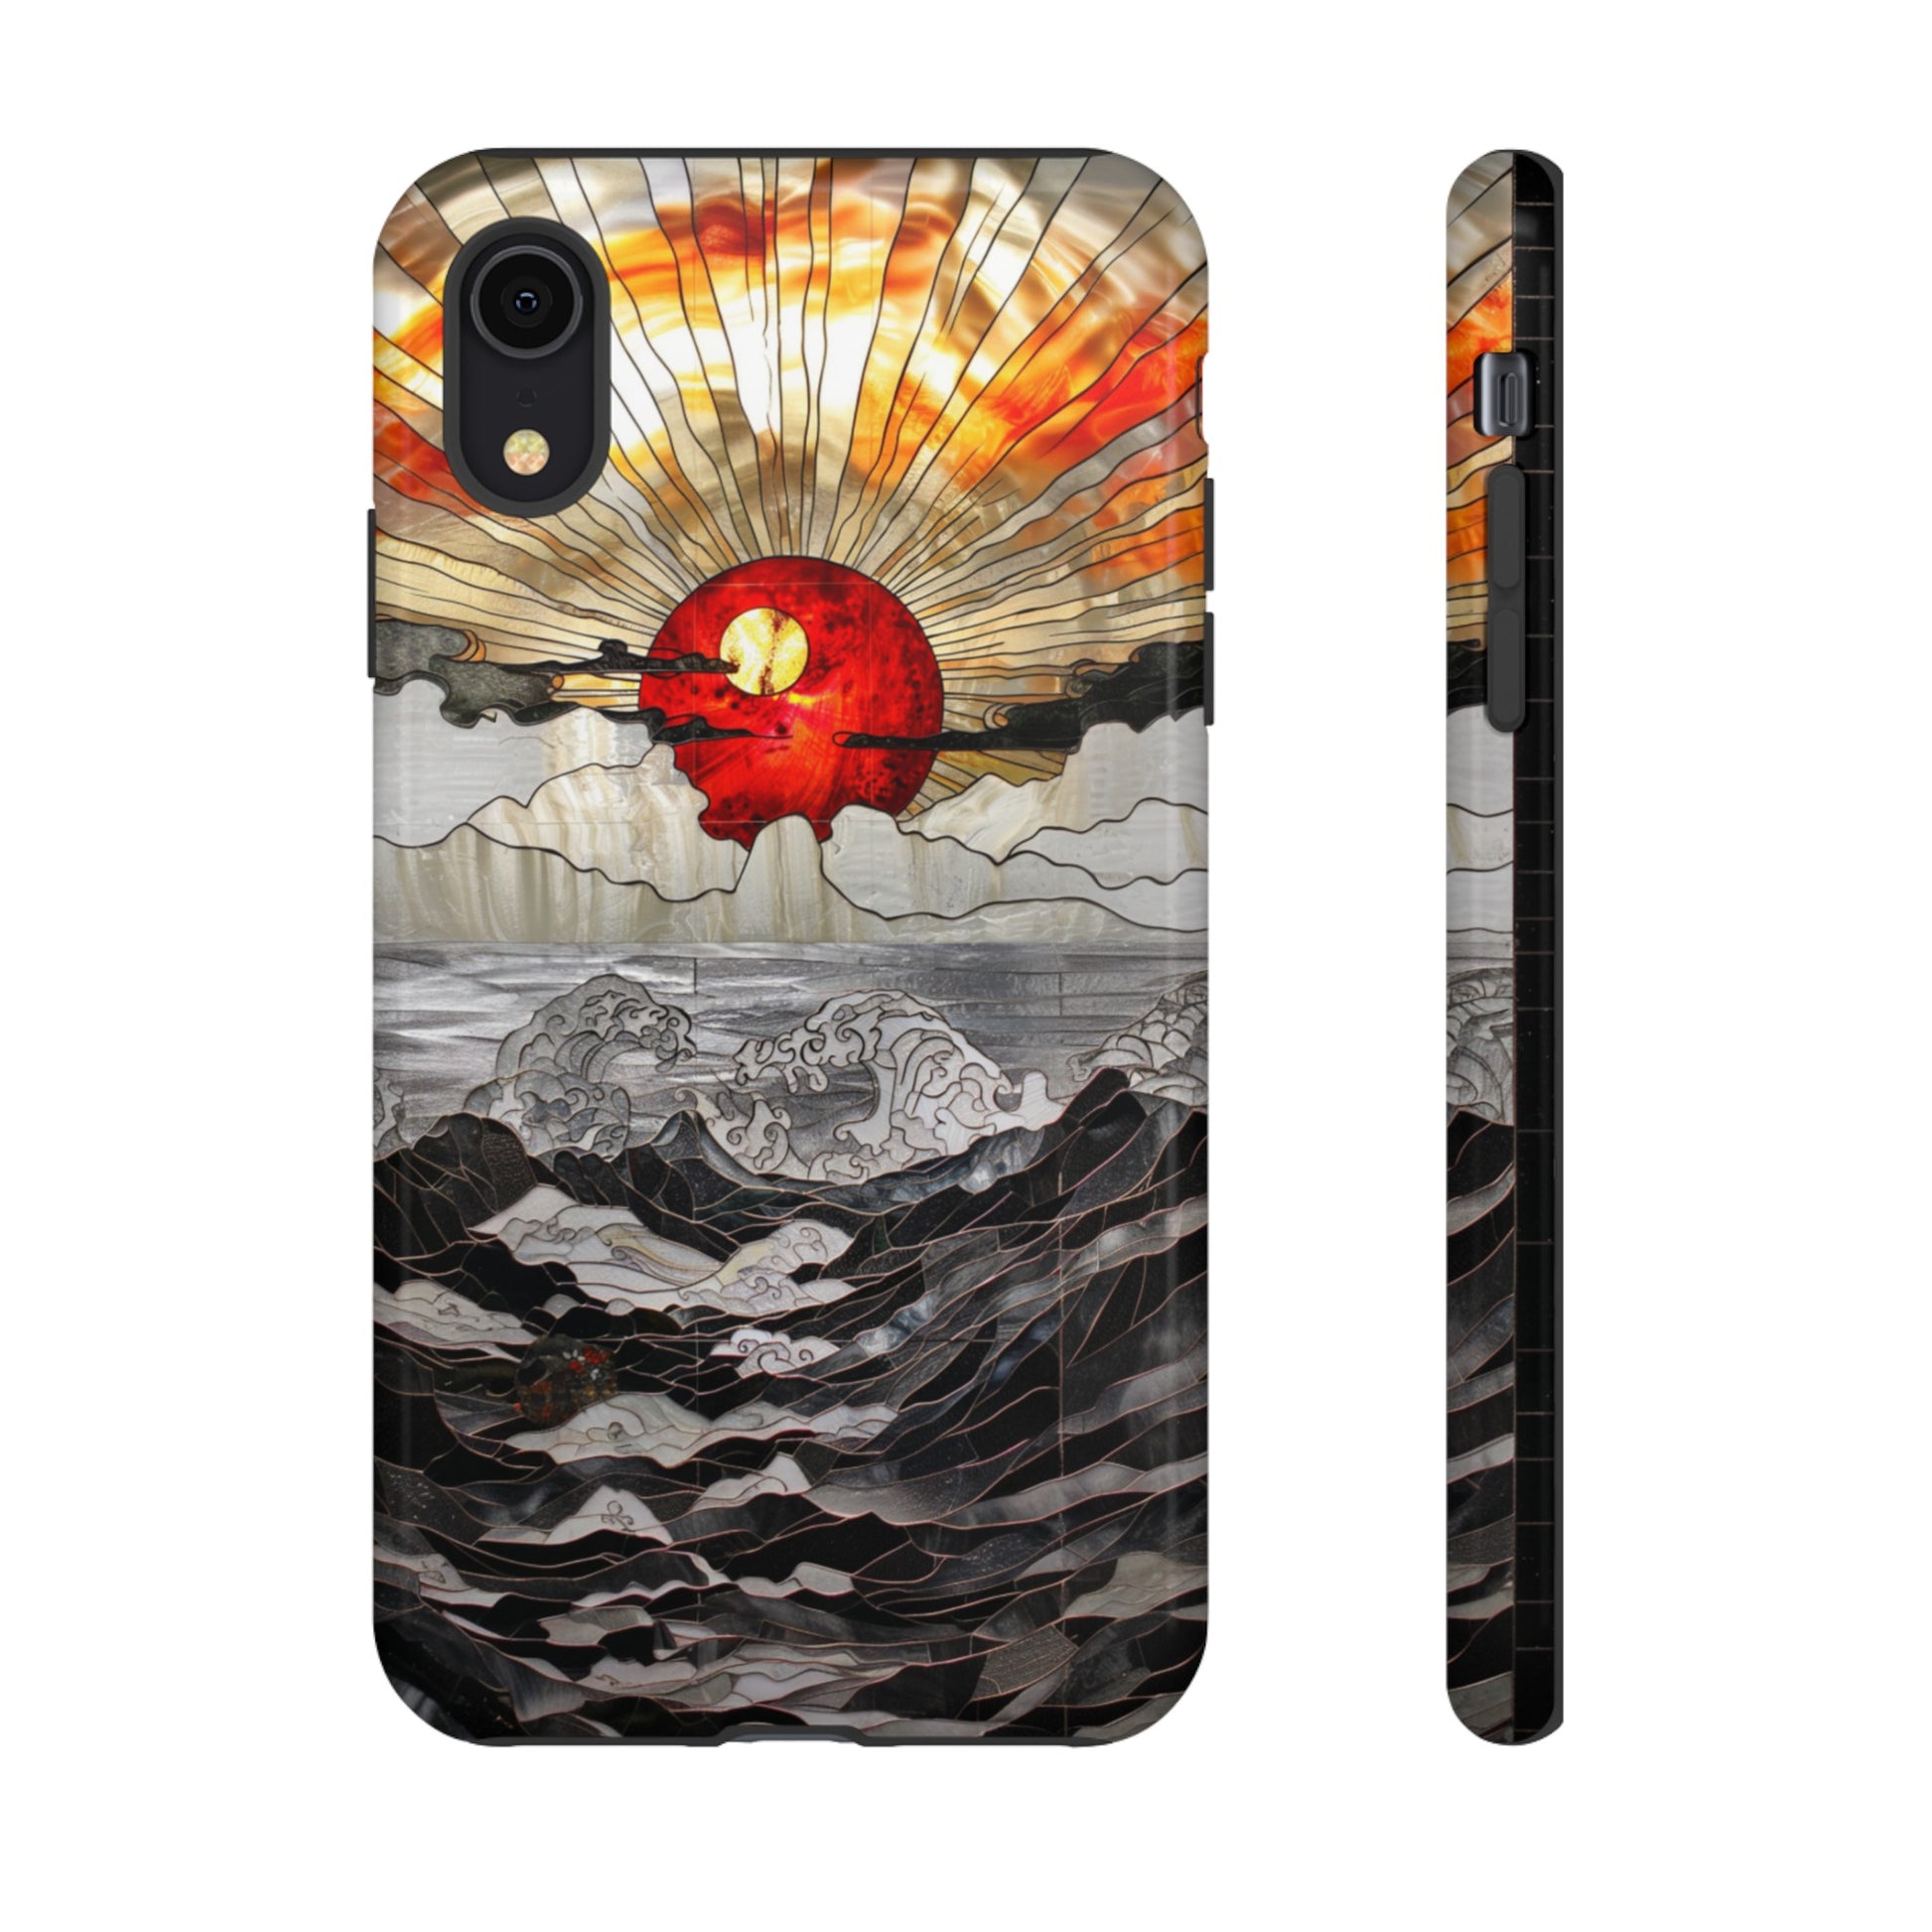 Best iPhone cases with Japanese rising sun design